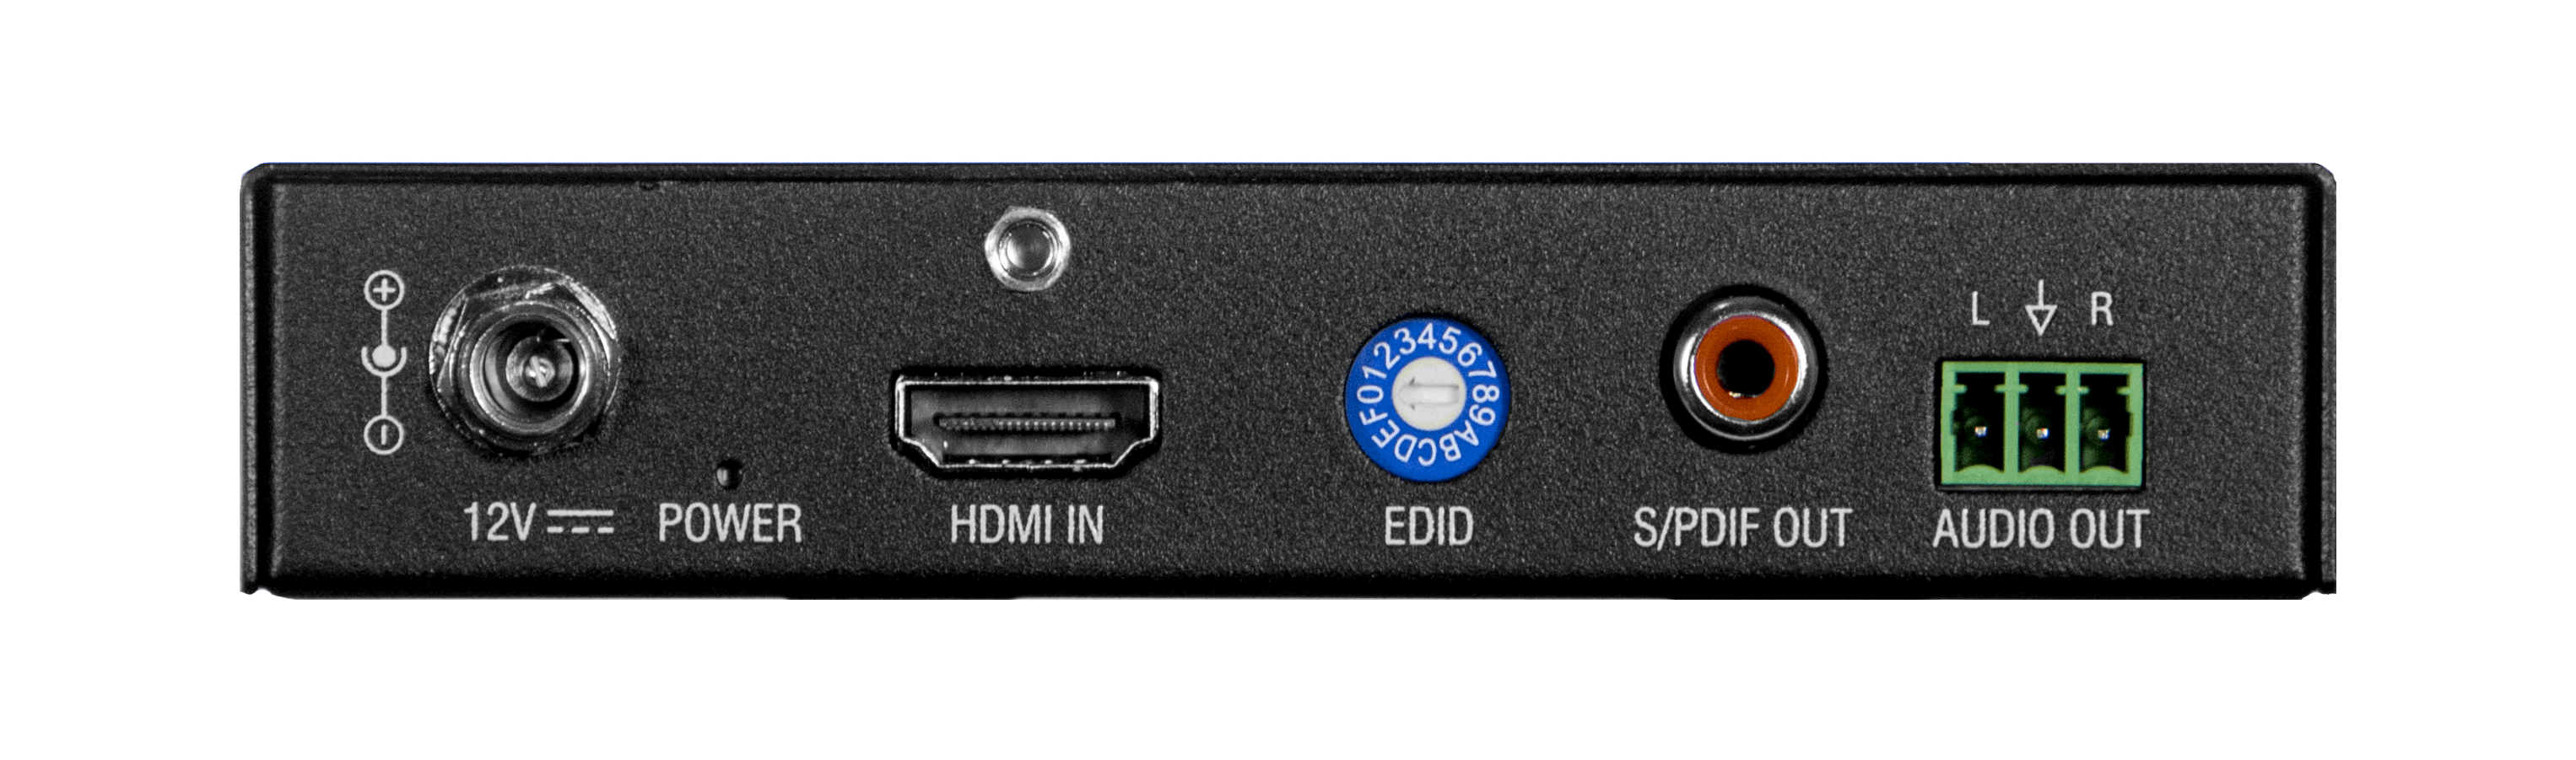 AMX Logo - DCE-1 In-Line Controller | AMX Audio Video Control Systems